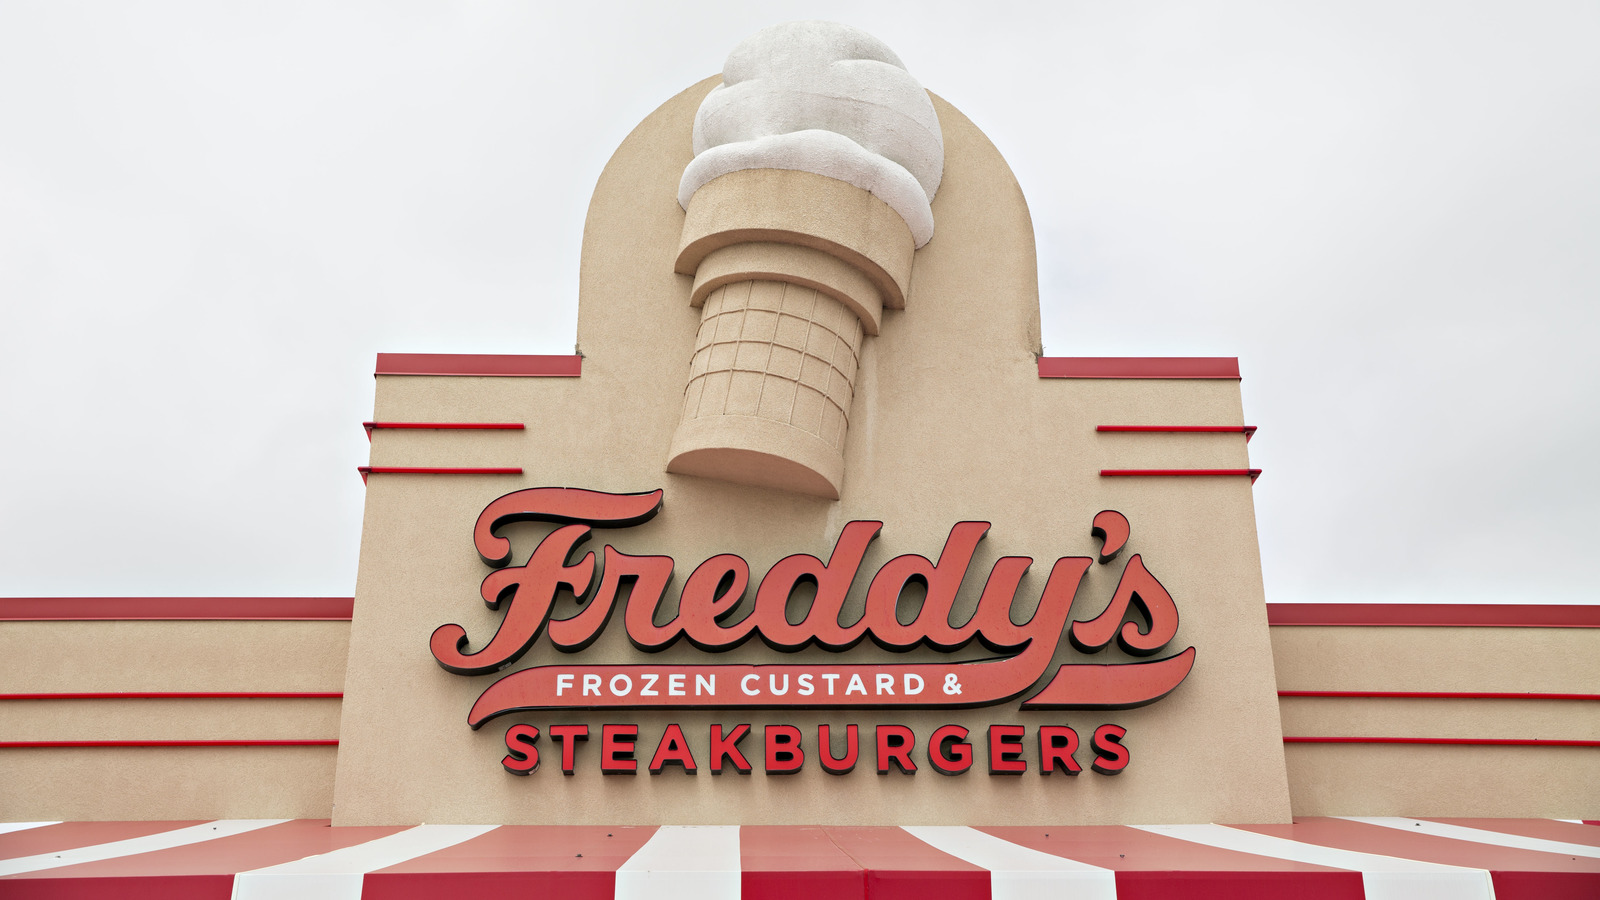 Happy National #Cheeseburger Day. Where is your absolute favorite burg, freddys  steakburgers